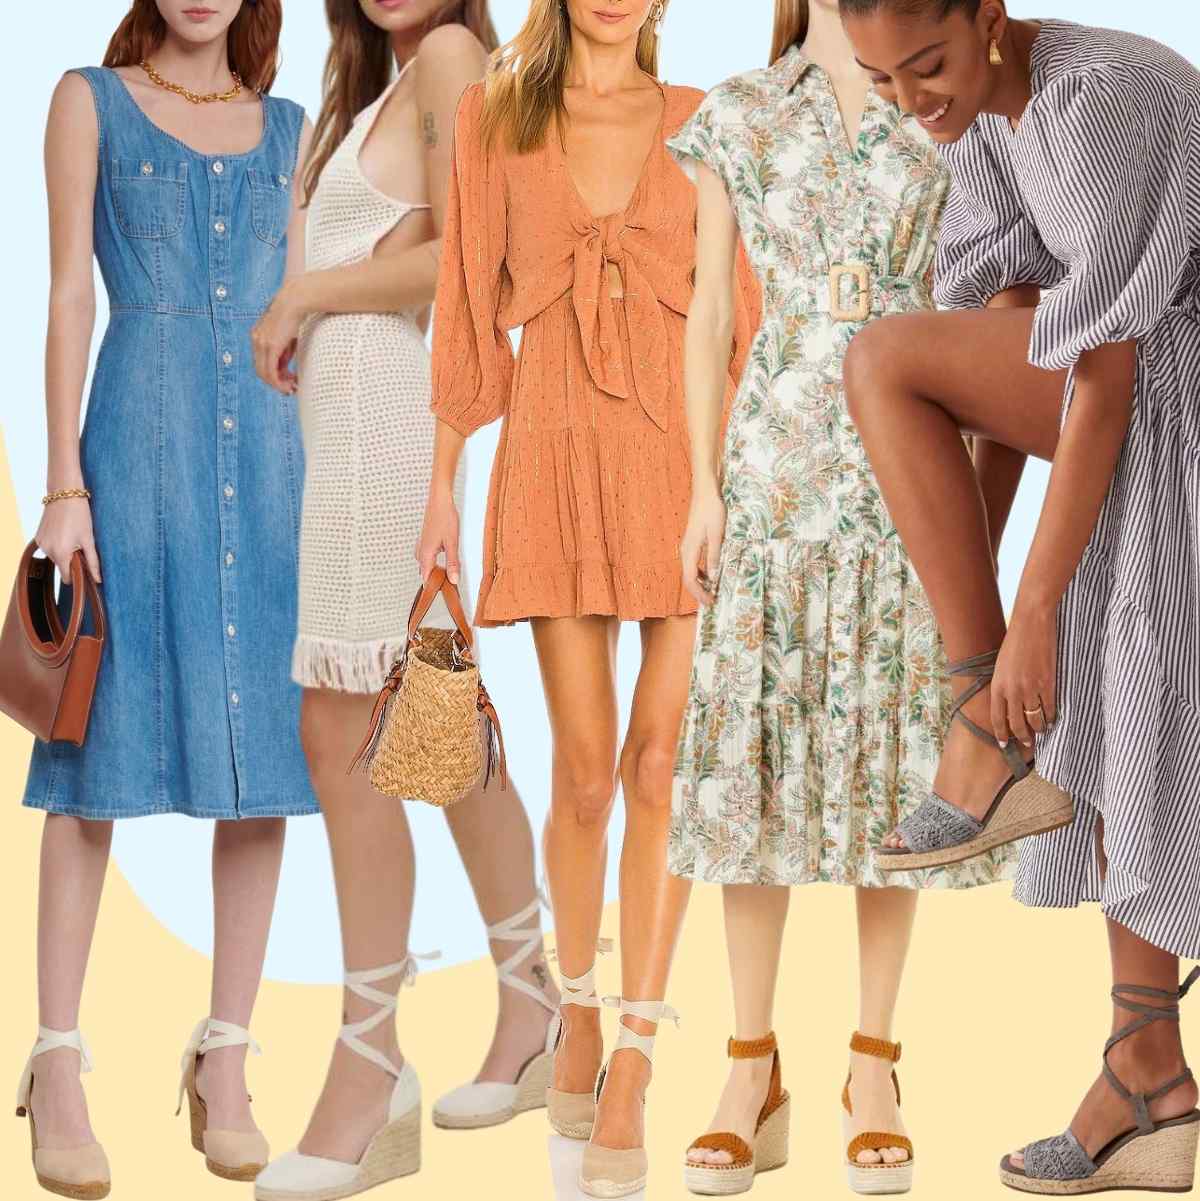 Collage of 5 women wearing espadrilles with dresses.